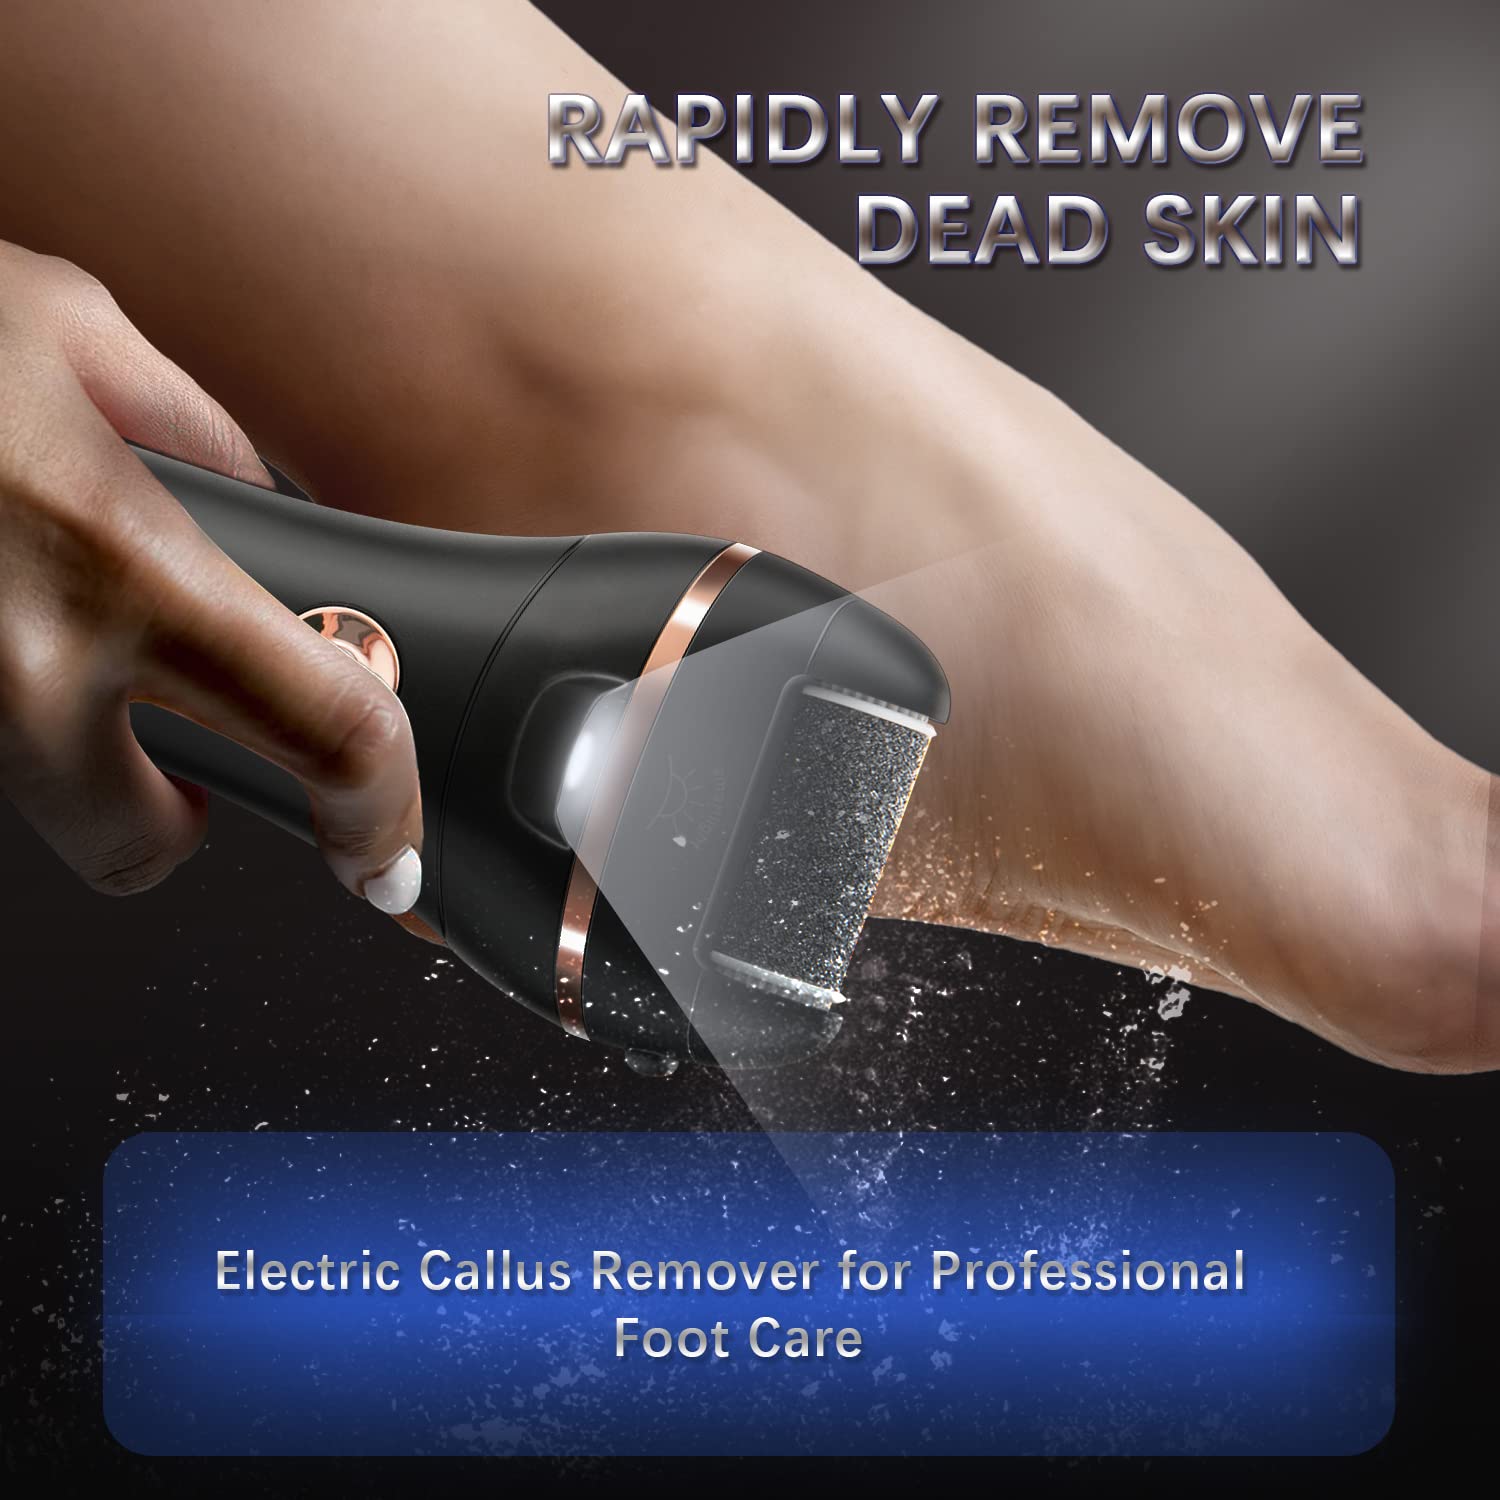 Electric Callus Remover for Feet, NiceBirdie Foot File Callus Remover Feet Scrubber Dead Skin PedicureTools Kit Rechargeable Electronic Waterproof Foot Care Supplies（Black）